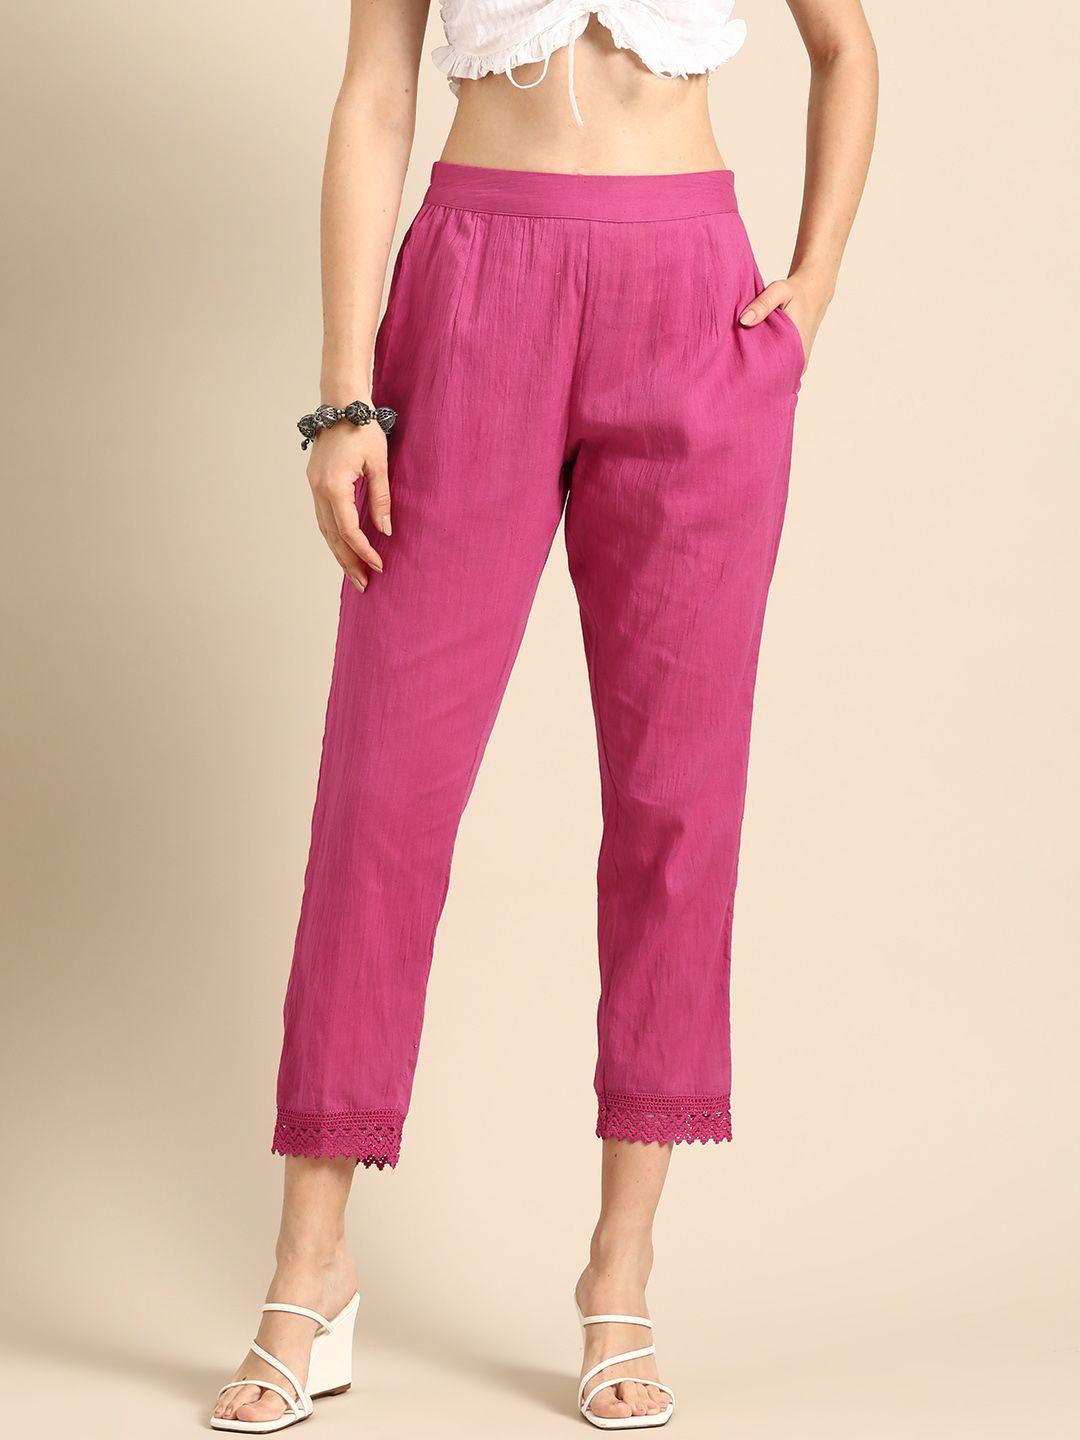 sangria-women-pure-cotton-lace-detailed-cropped-trousers